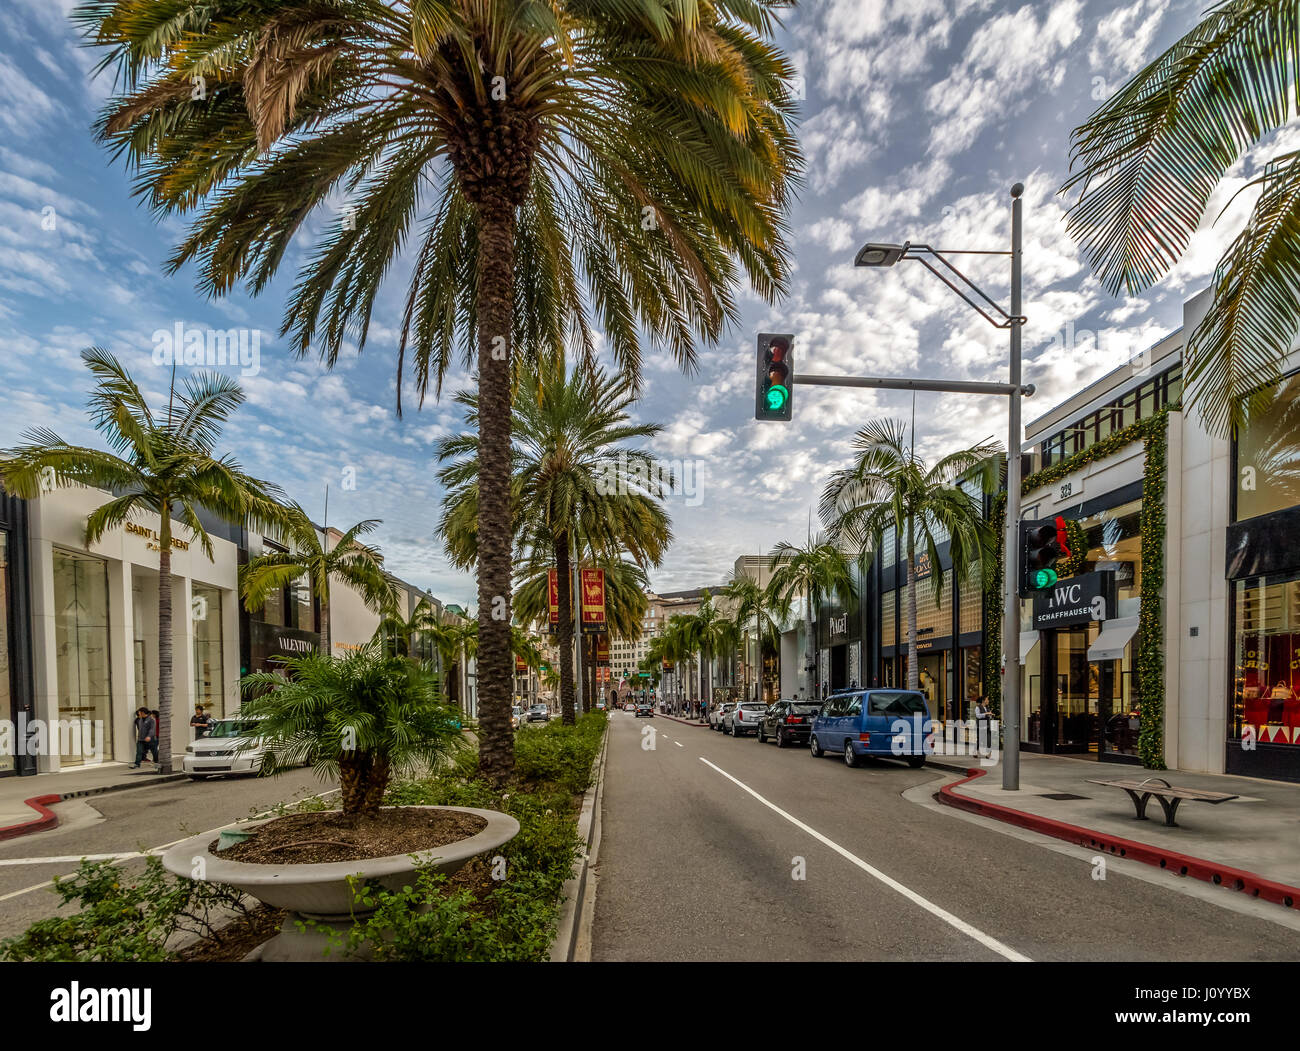 Detail of traditional Rodeo Drive road sign in Beverly Hills, Los Angeles  Stock Photo - Alamy